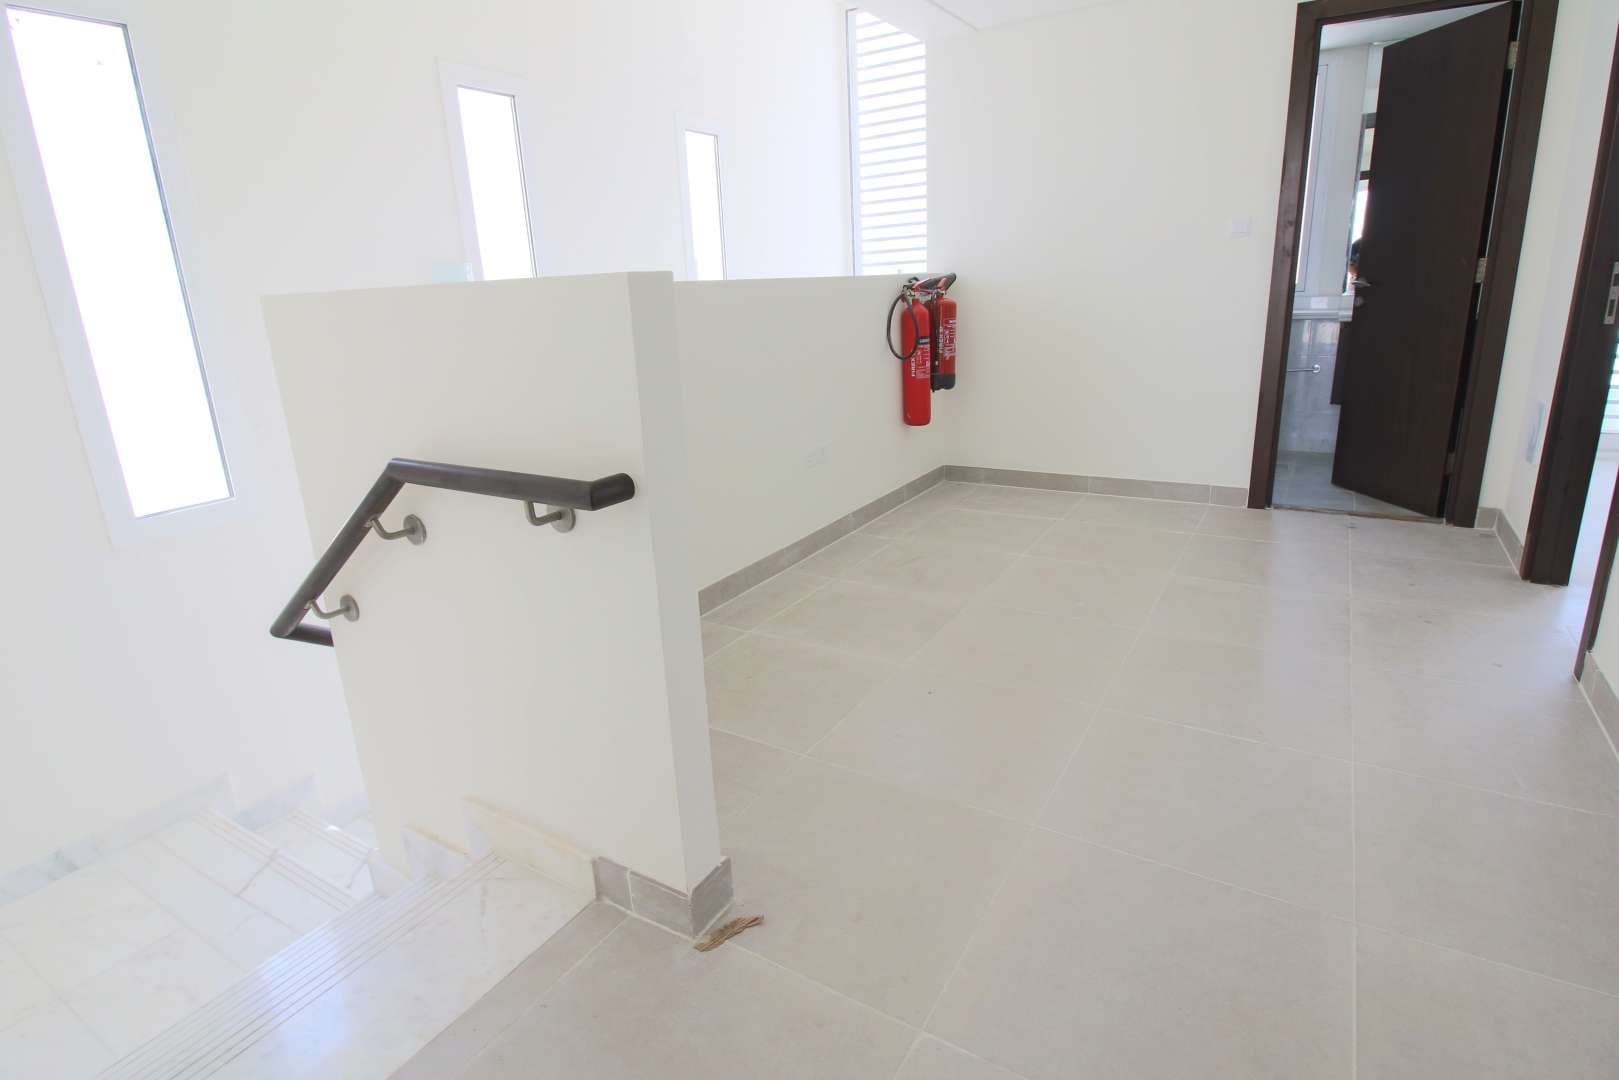 3 Bedroom Townhouse For Rent Arabella Townhouses Lp06810 1f6a27caa2054700.jpg